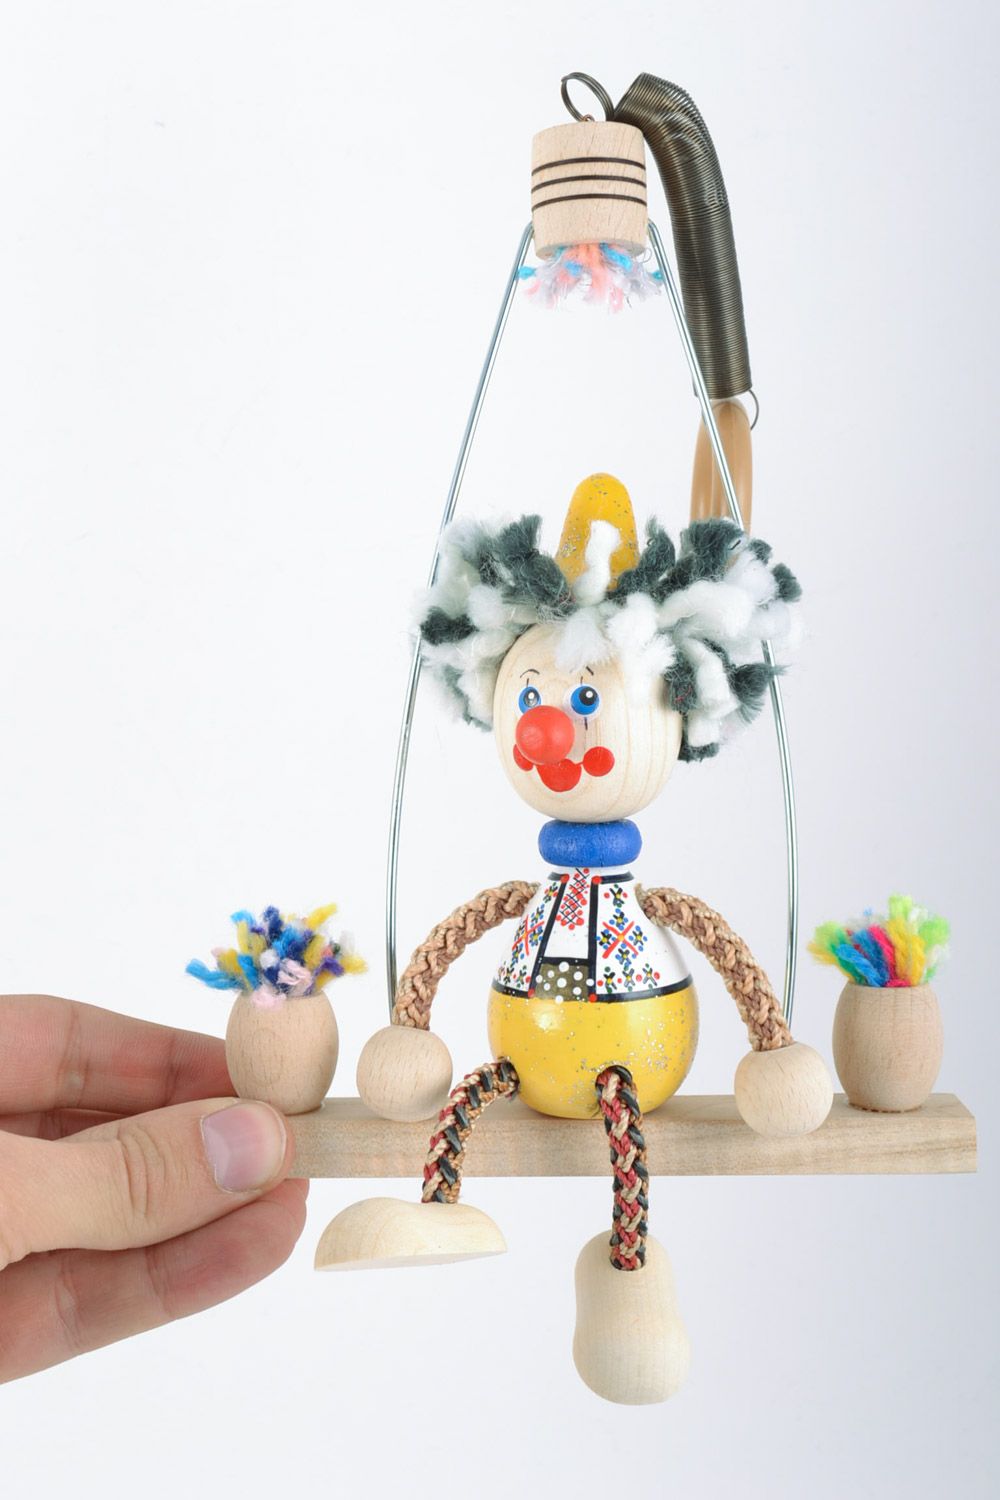 Handmade eco friendly painted varnished wooden toy cute clown on swing for kids photo 2